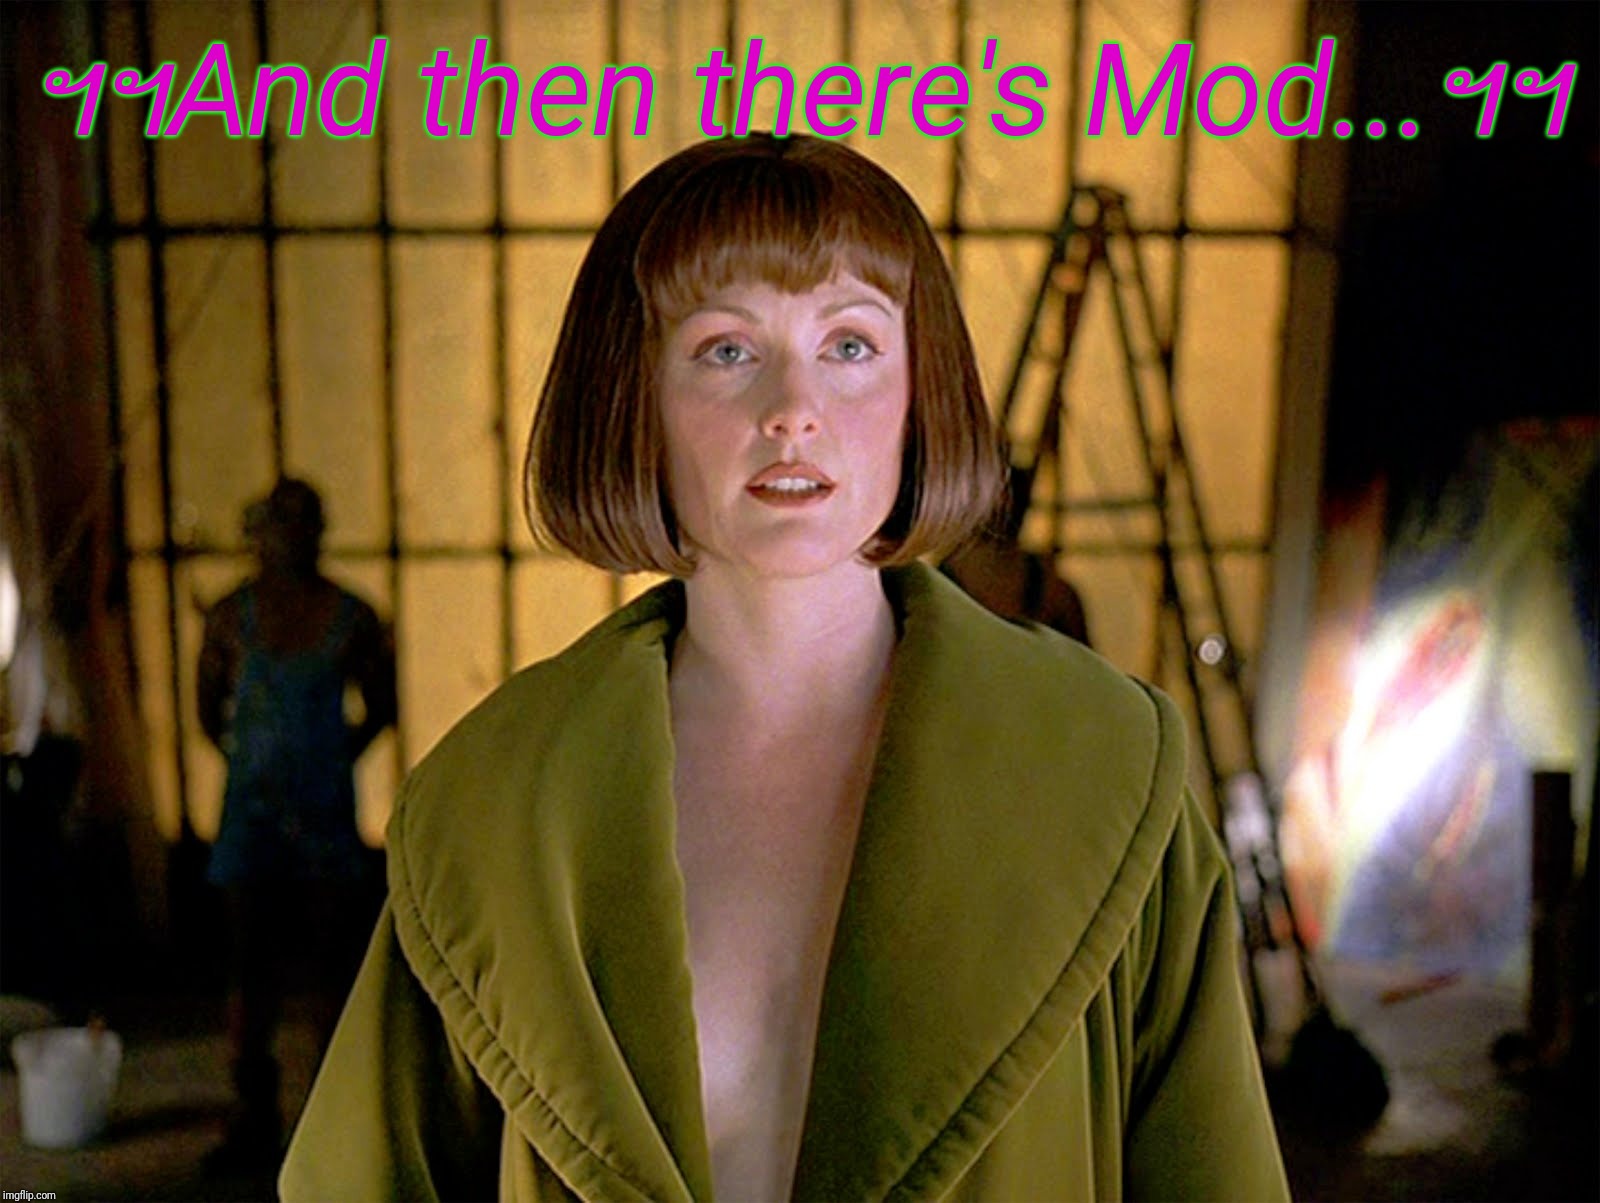 Maude Lebowski | ฯฯAnd then there's Mod...ฯฯ | image tagged in maude lebowski | made w/ Imgflip meme maker